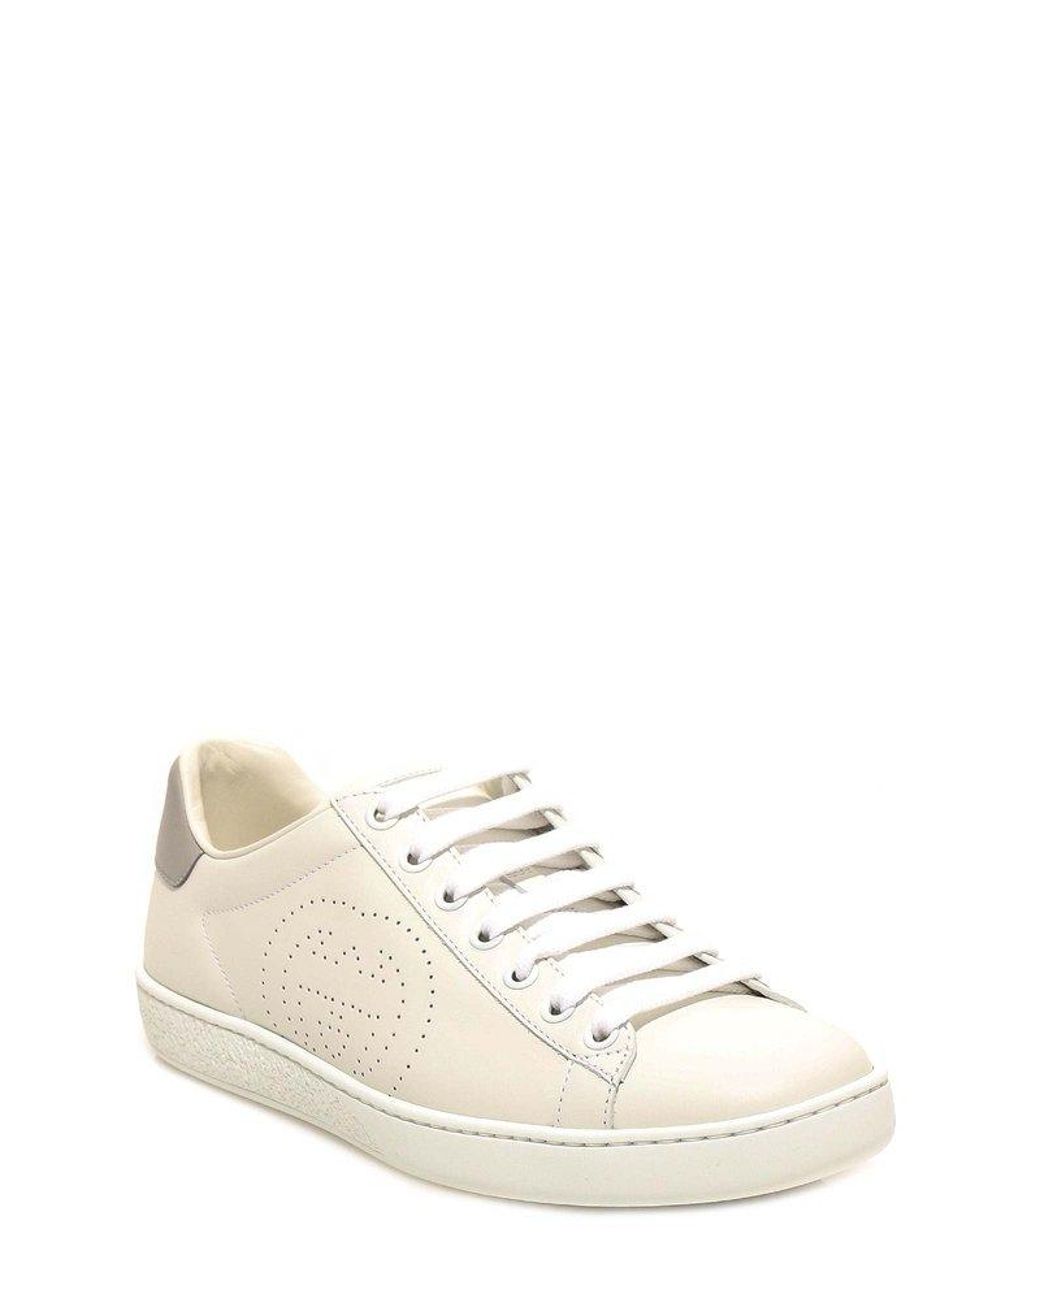 Gucci Ace Perforated Interlocking G Sneakers in Natural | Lyst